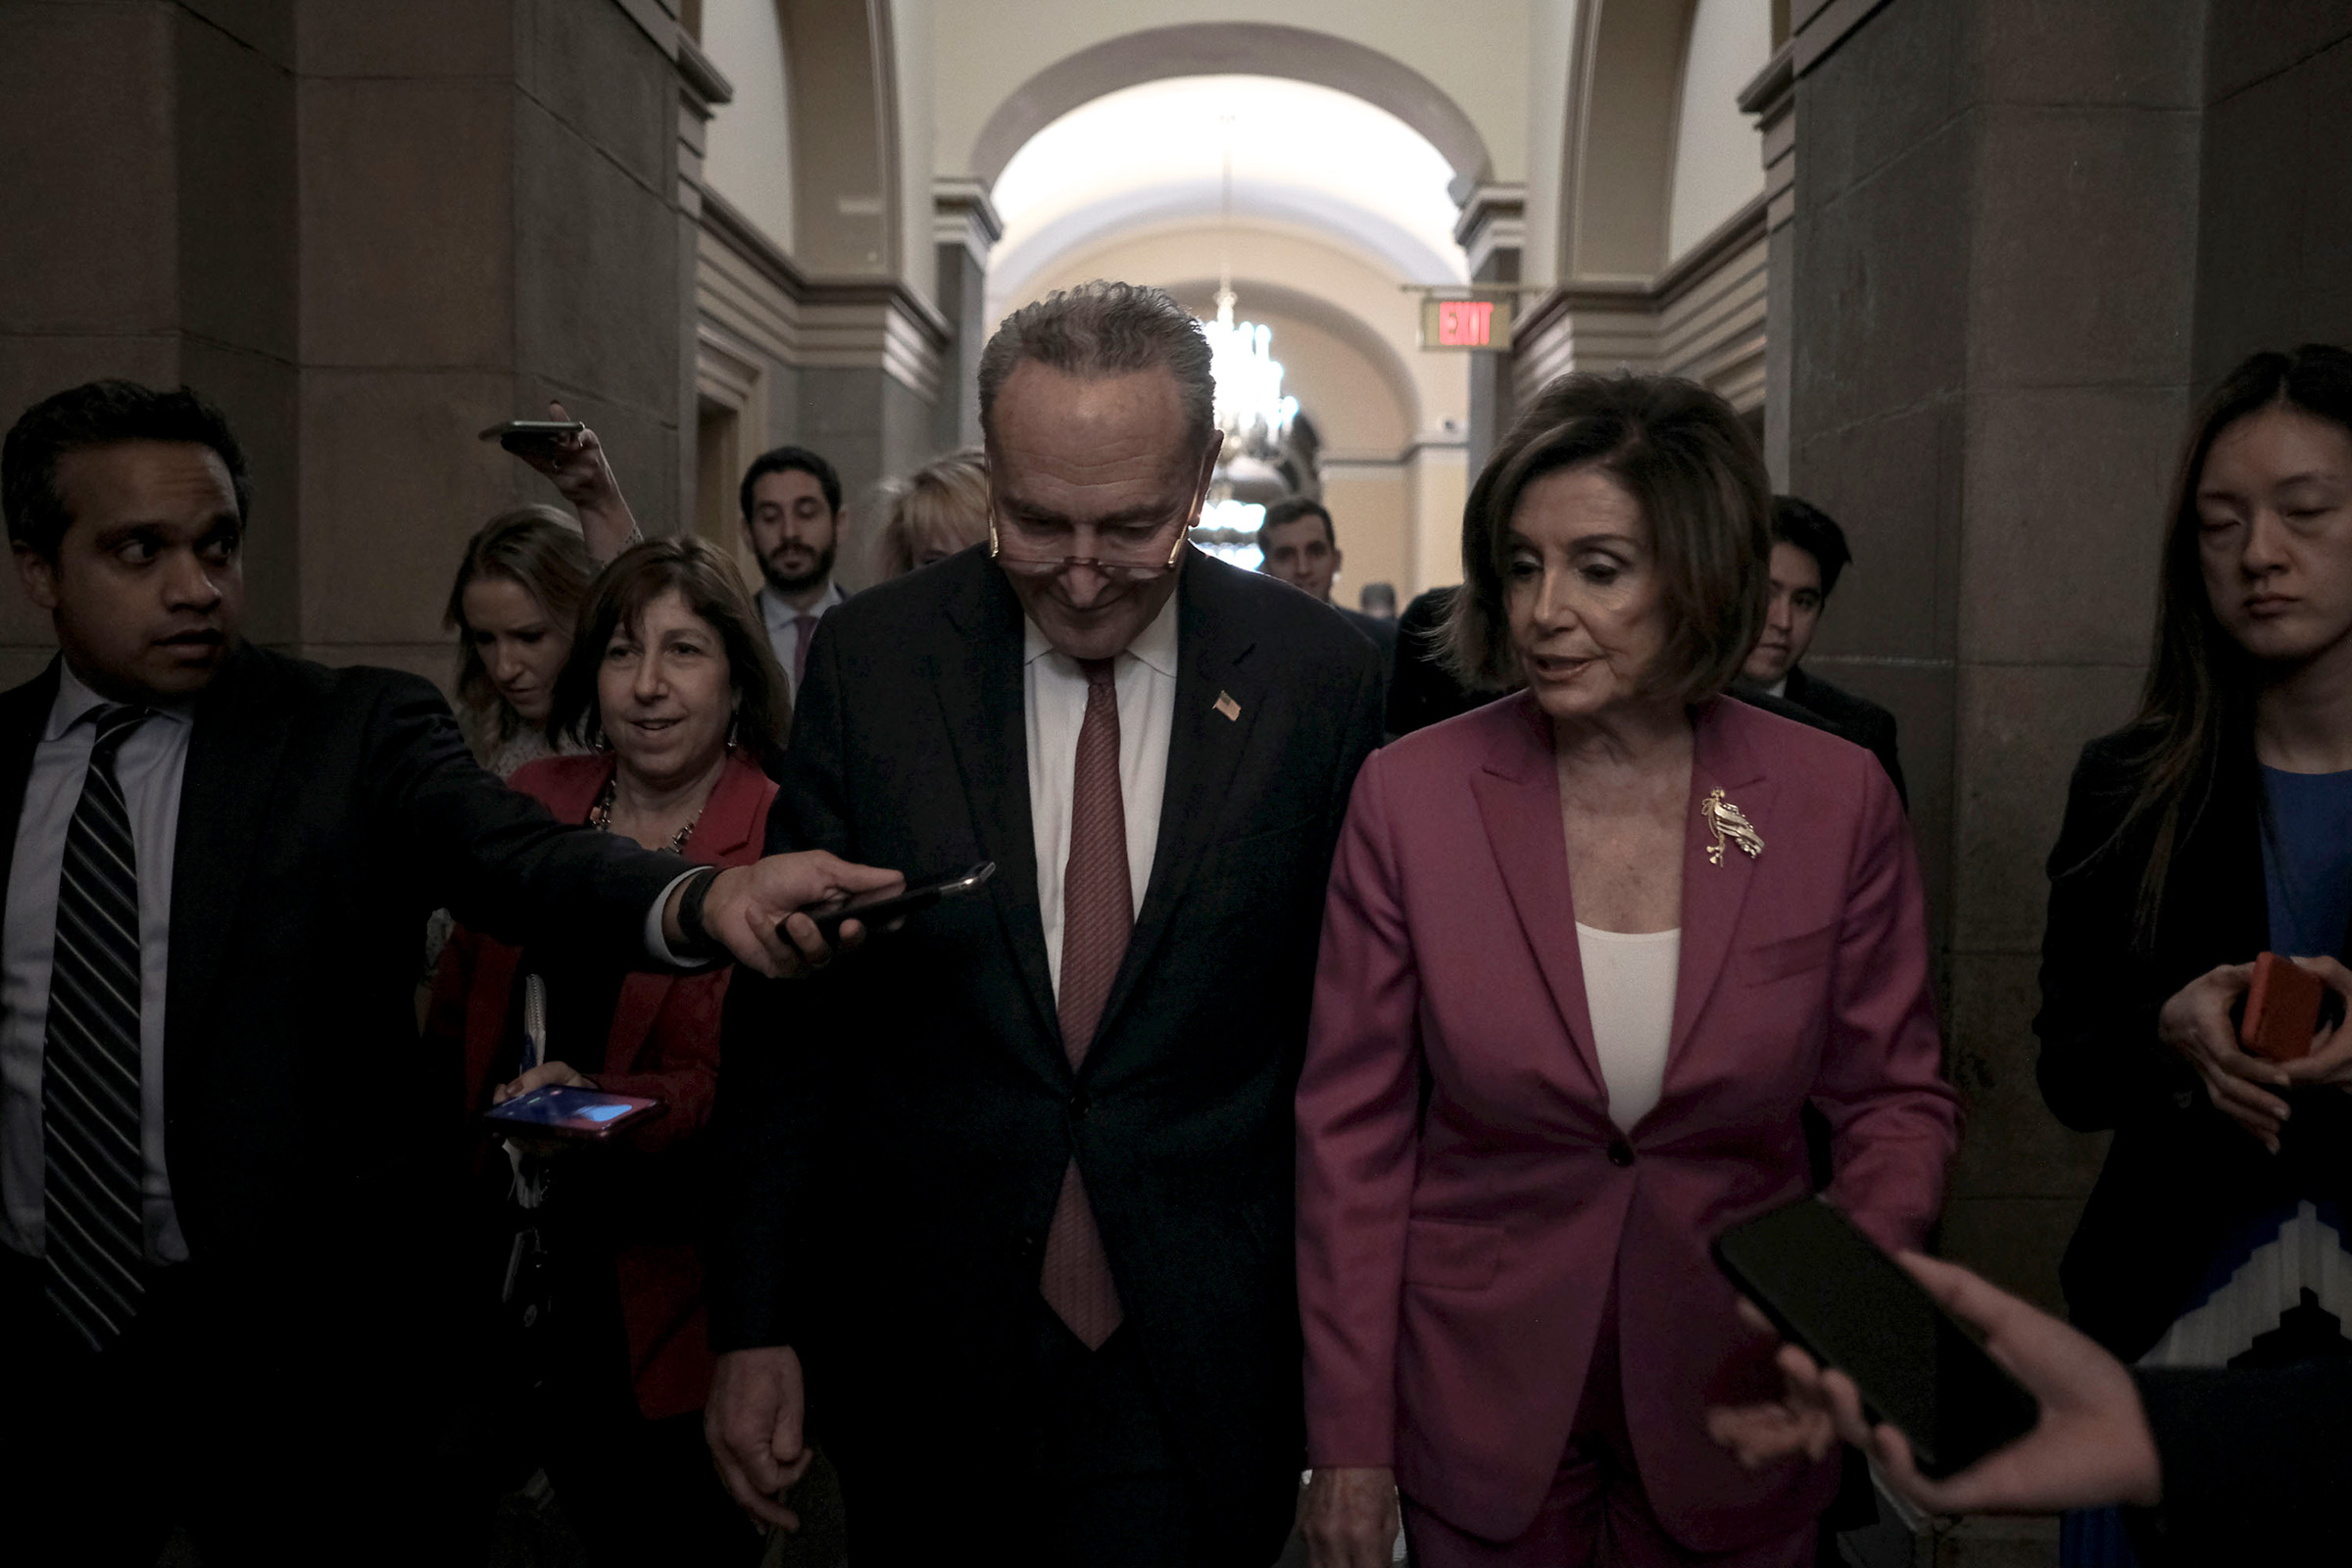 2/4/20, Capitol Hill, Washington, D.C. Senate Minority Leader Chuck Schumer (D-N.Y.) and Speaker Nancy Pelosi (D-Calif.) leave a press conference on lowering the price for healthcare in anticipation to President Trump's State of the Union address at the Capitol in Washington, D.C. on Feb. 4, 2020.Gabriella Demczuk / TIME